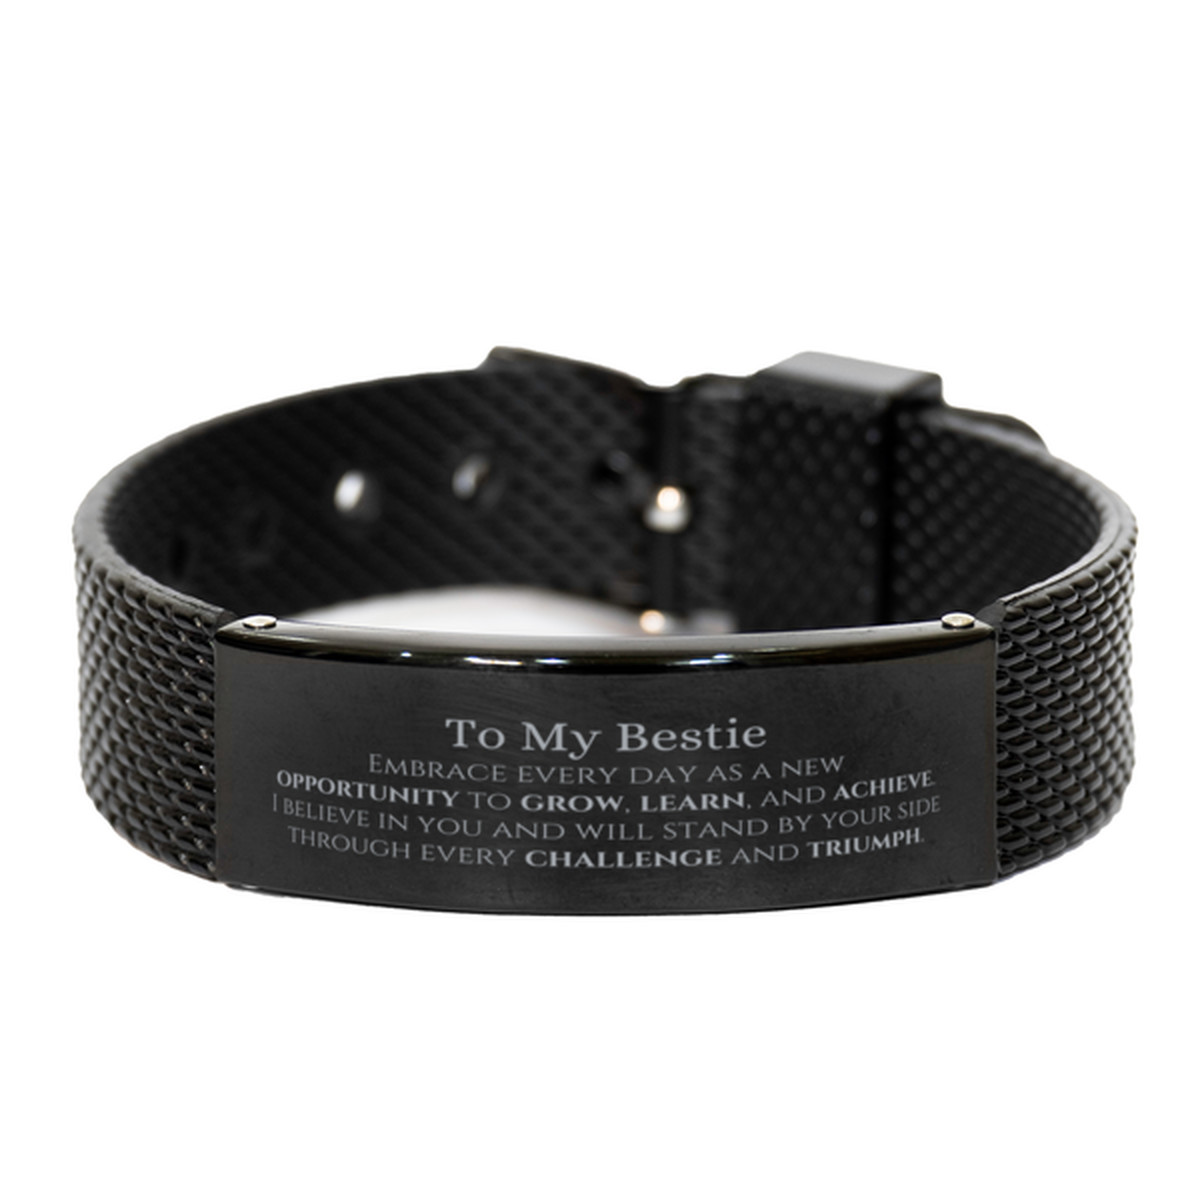 To My Bestie Gifts, I believe in you and will stand by your side, Inspirational Black Shark Mesh Bracelet For Bestie, Birthday Christmas Motivational Bestie Gifts